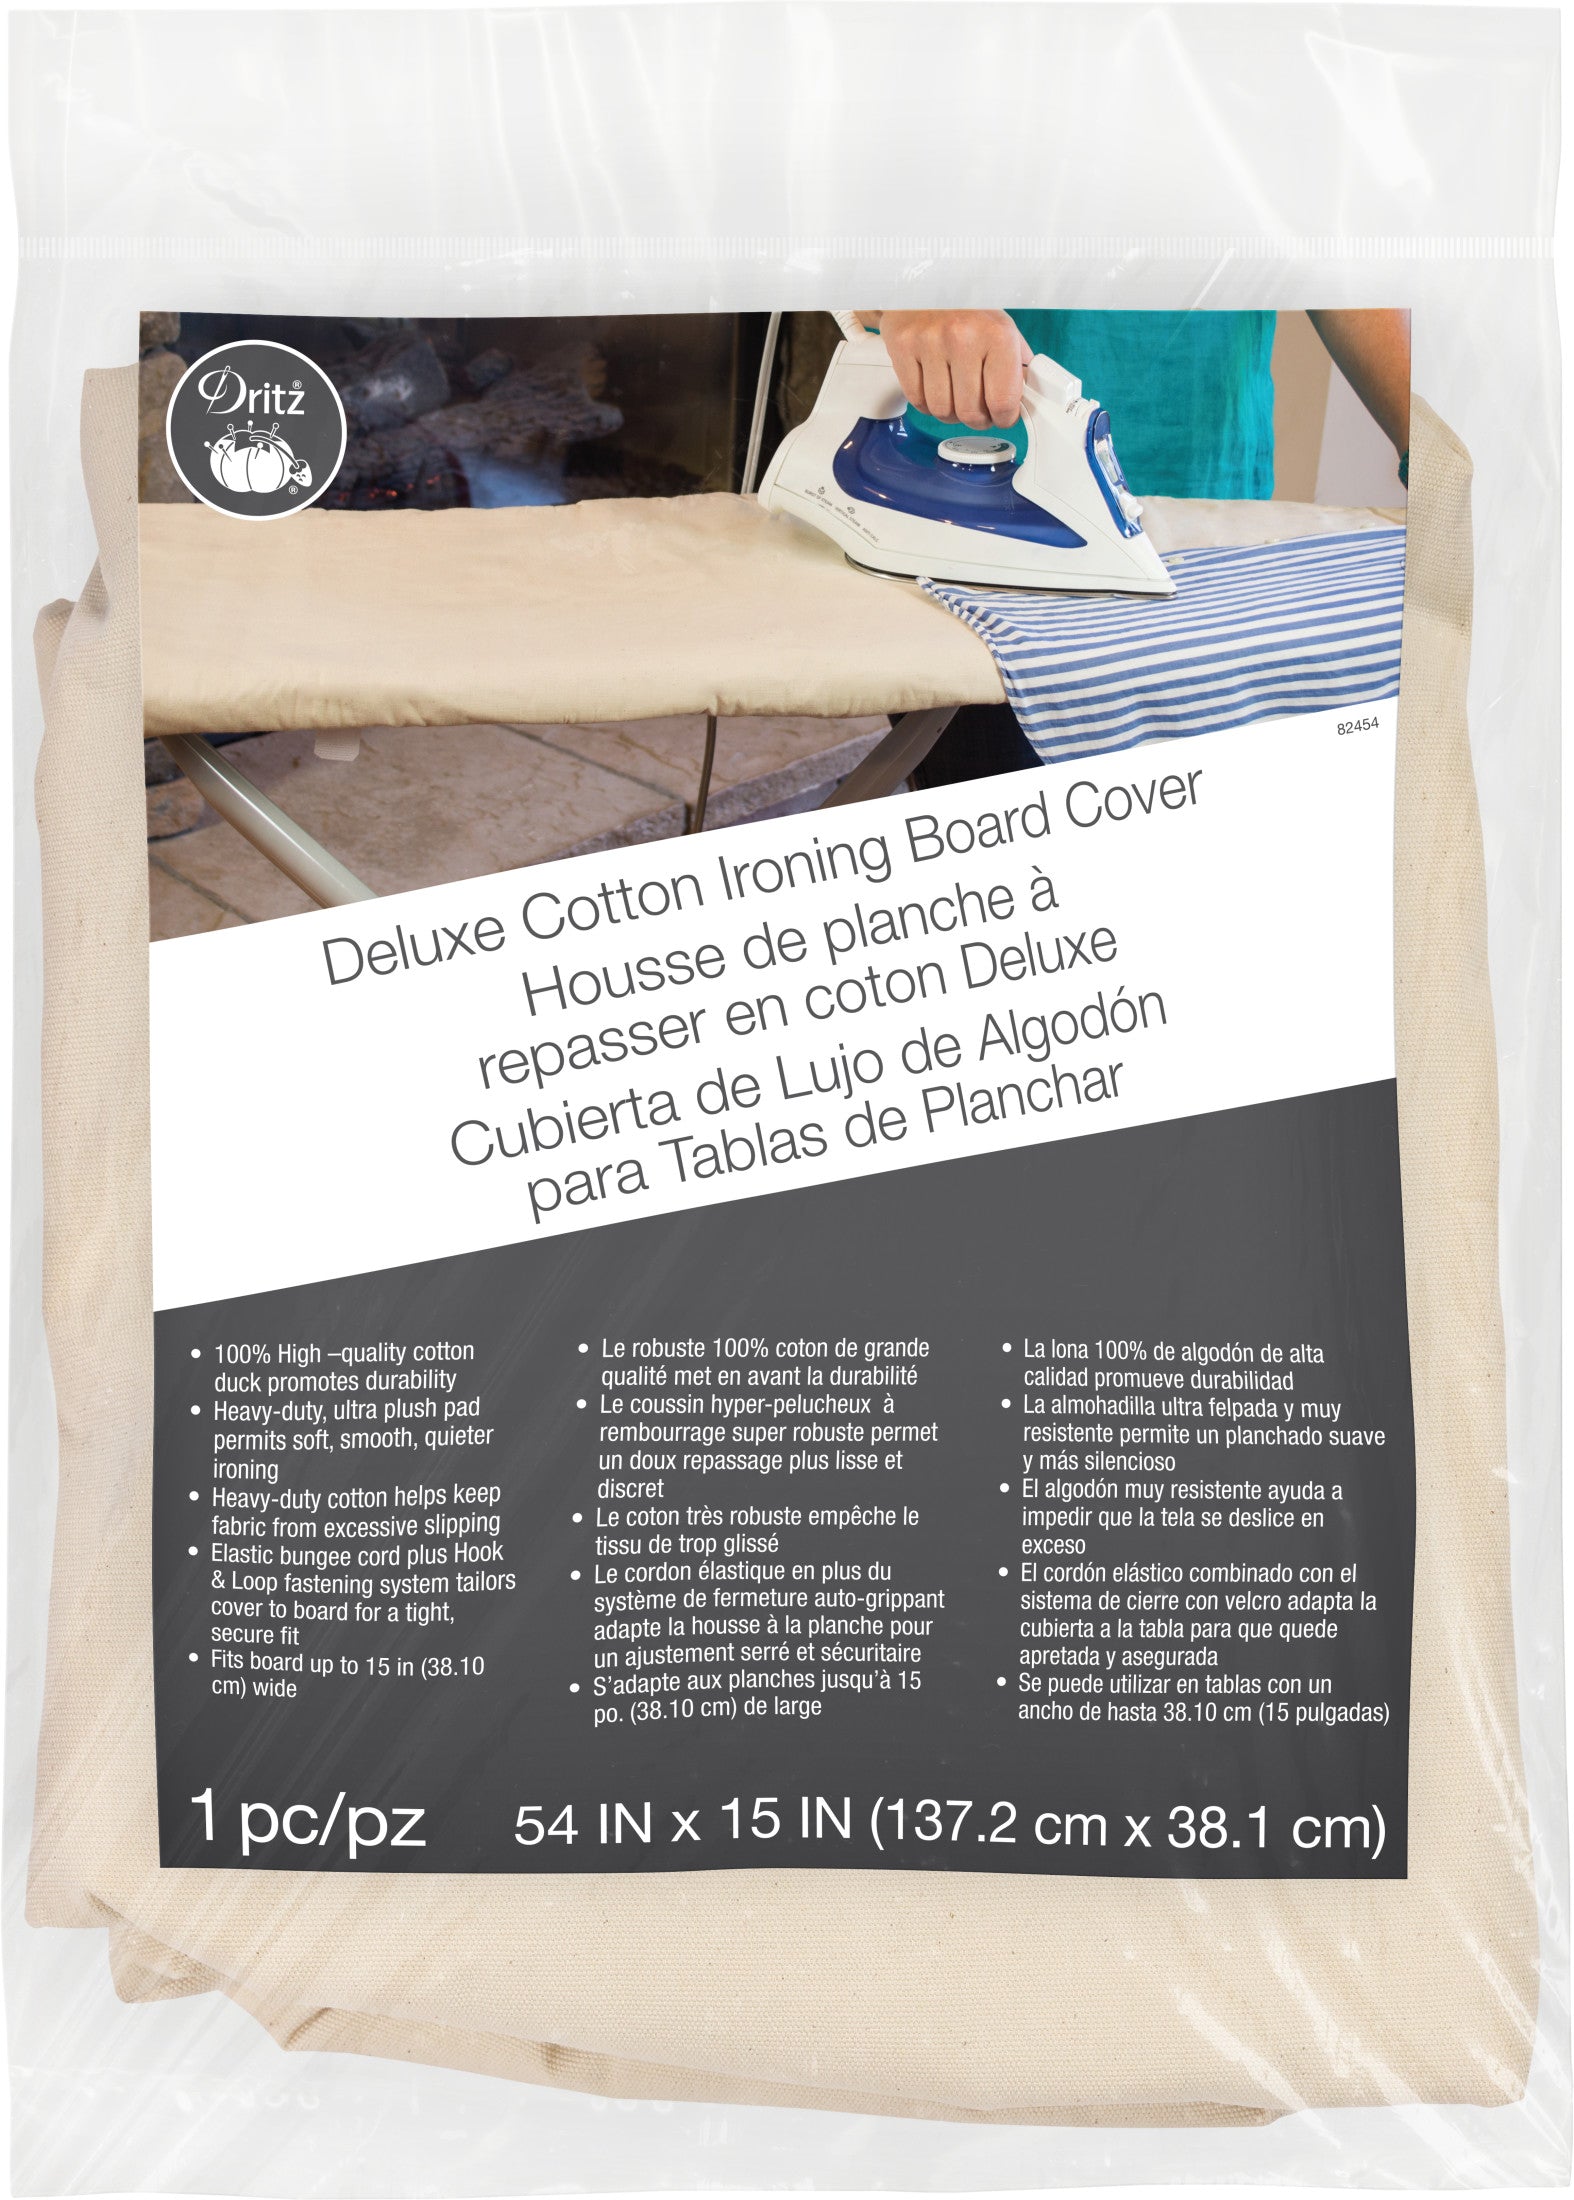 Dritz Deluxe Cotton Ironing Board Cover